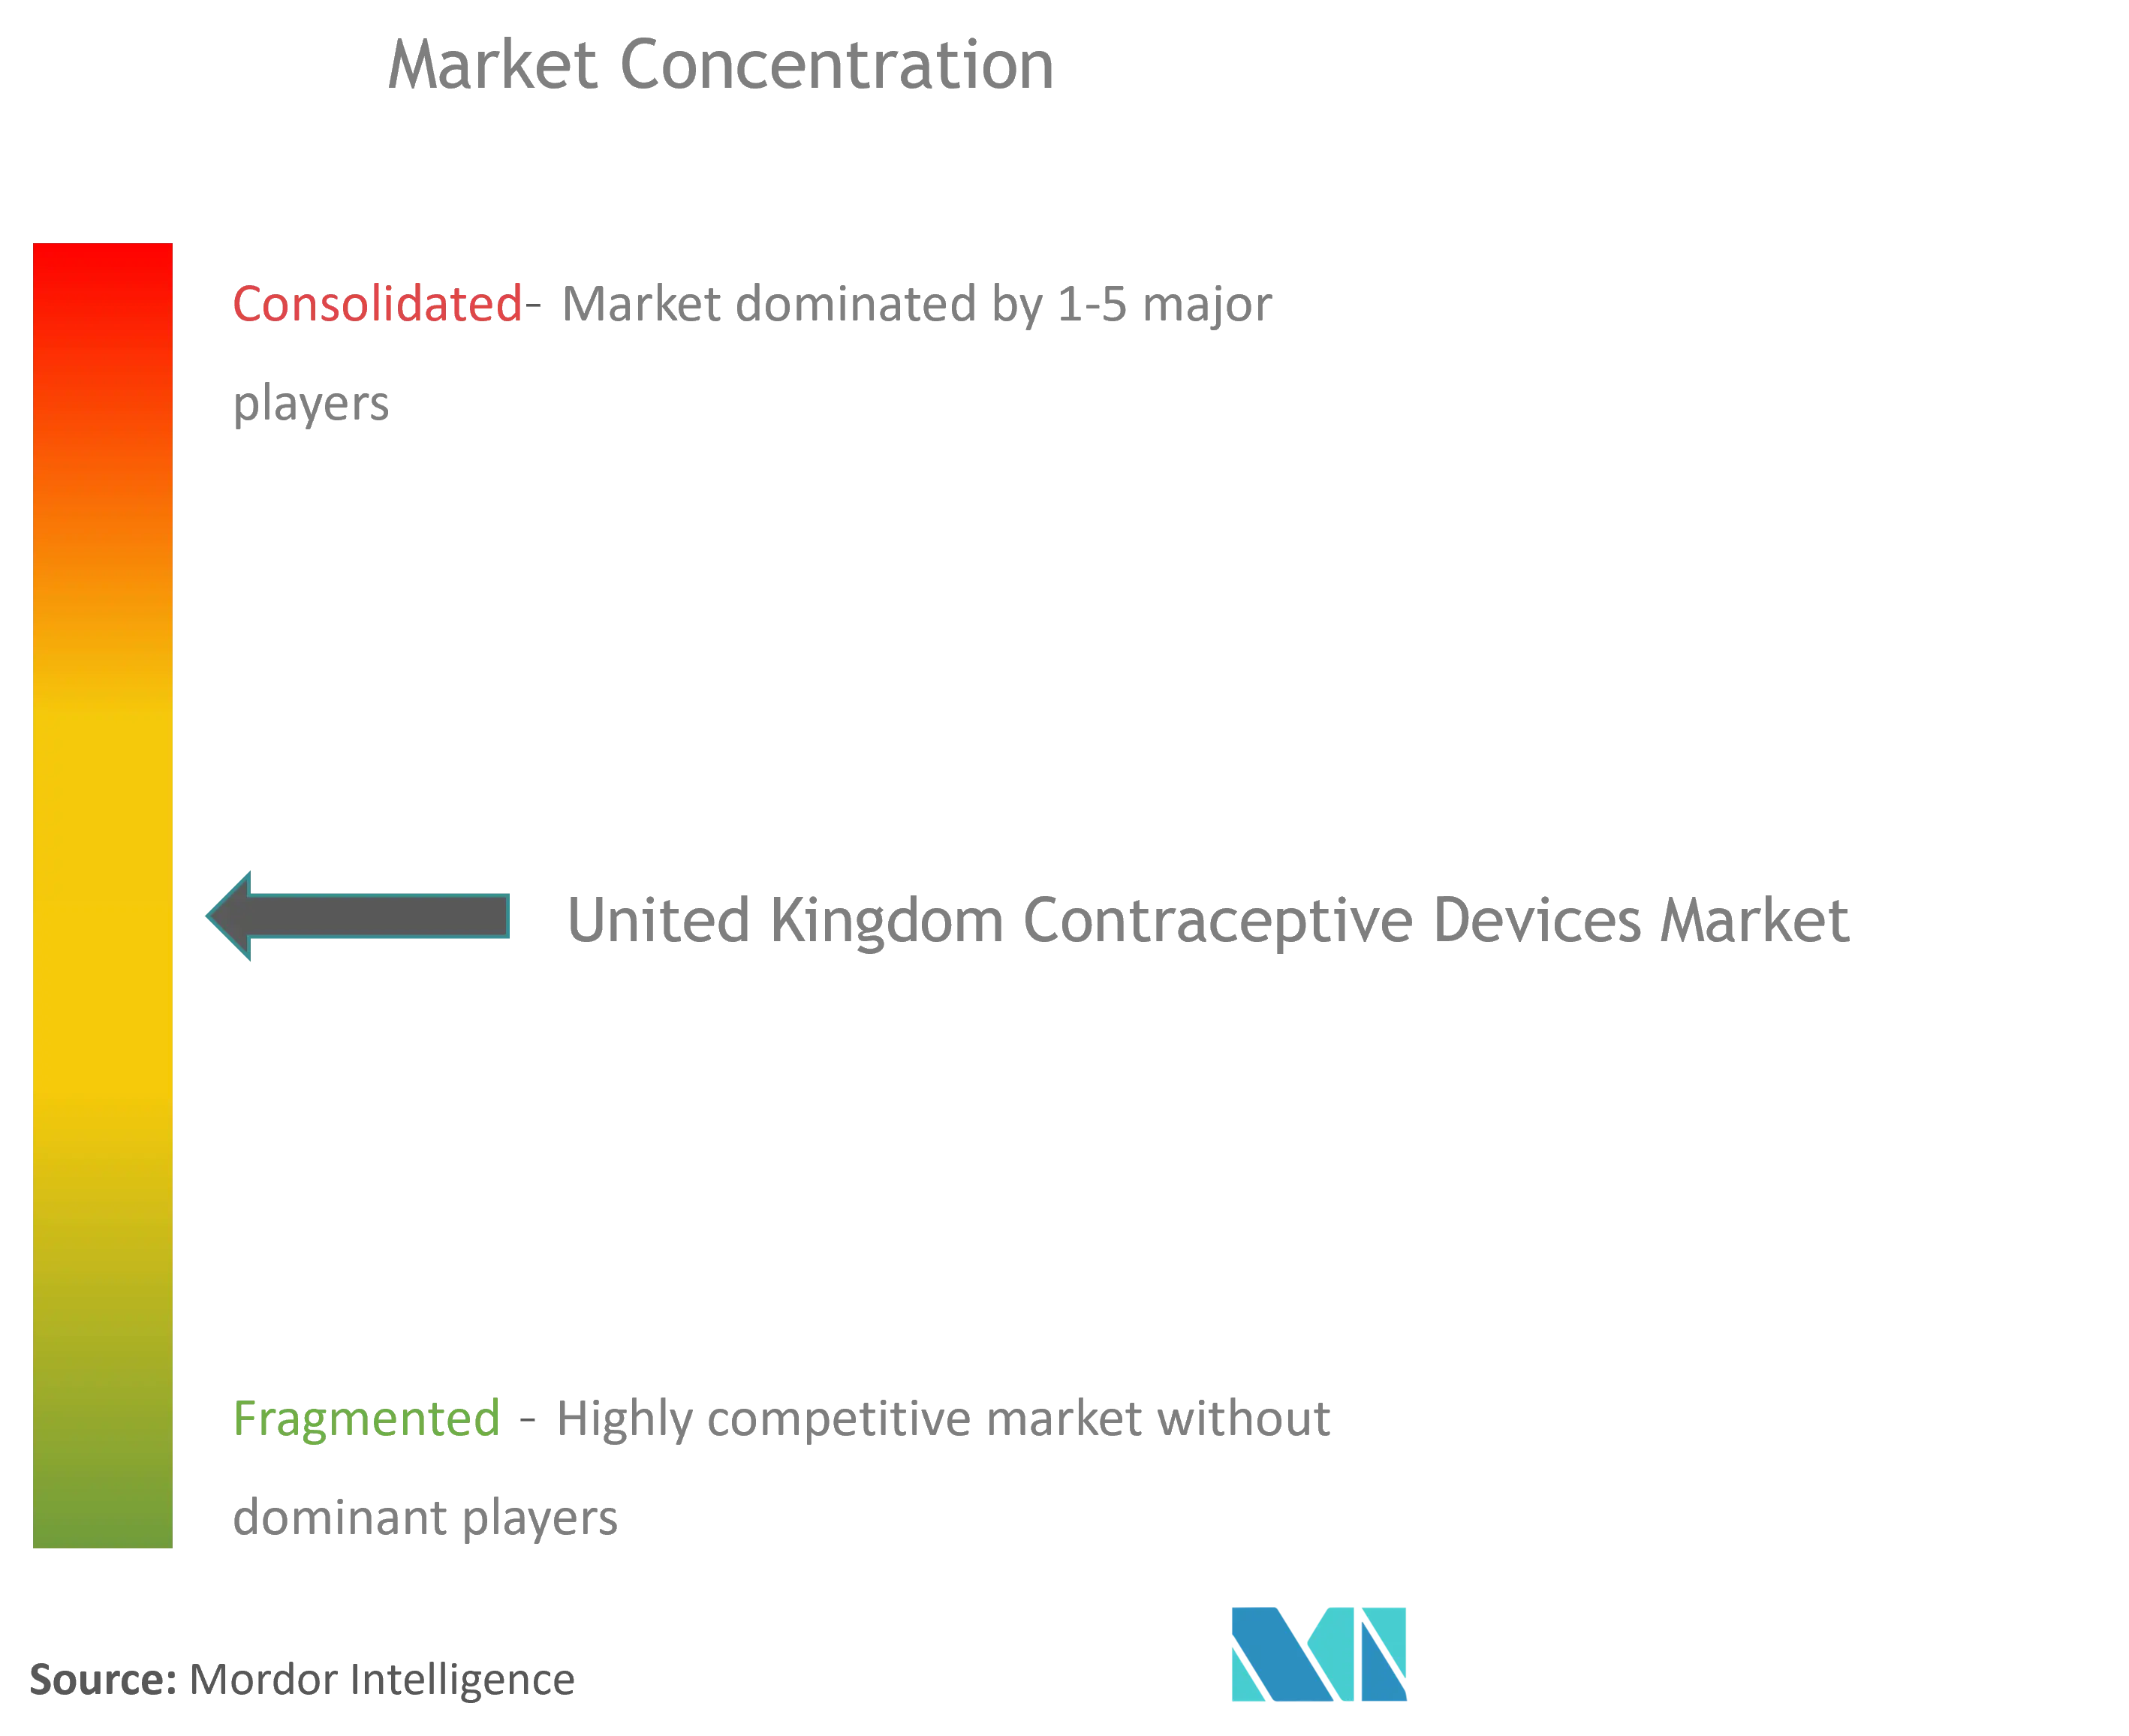 United Kingdom Contraceptive Devices Market - CL.png